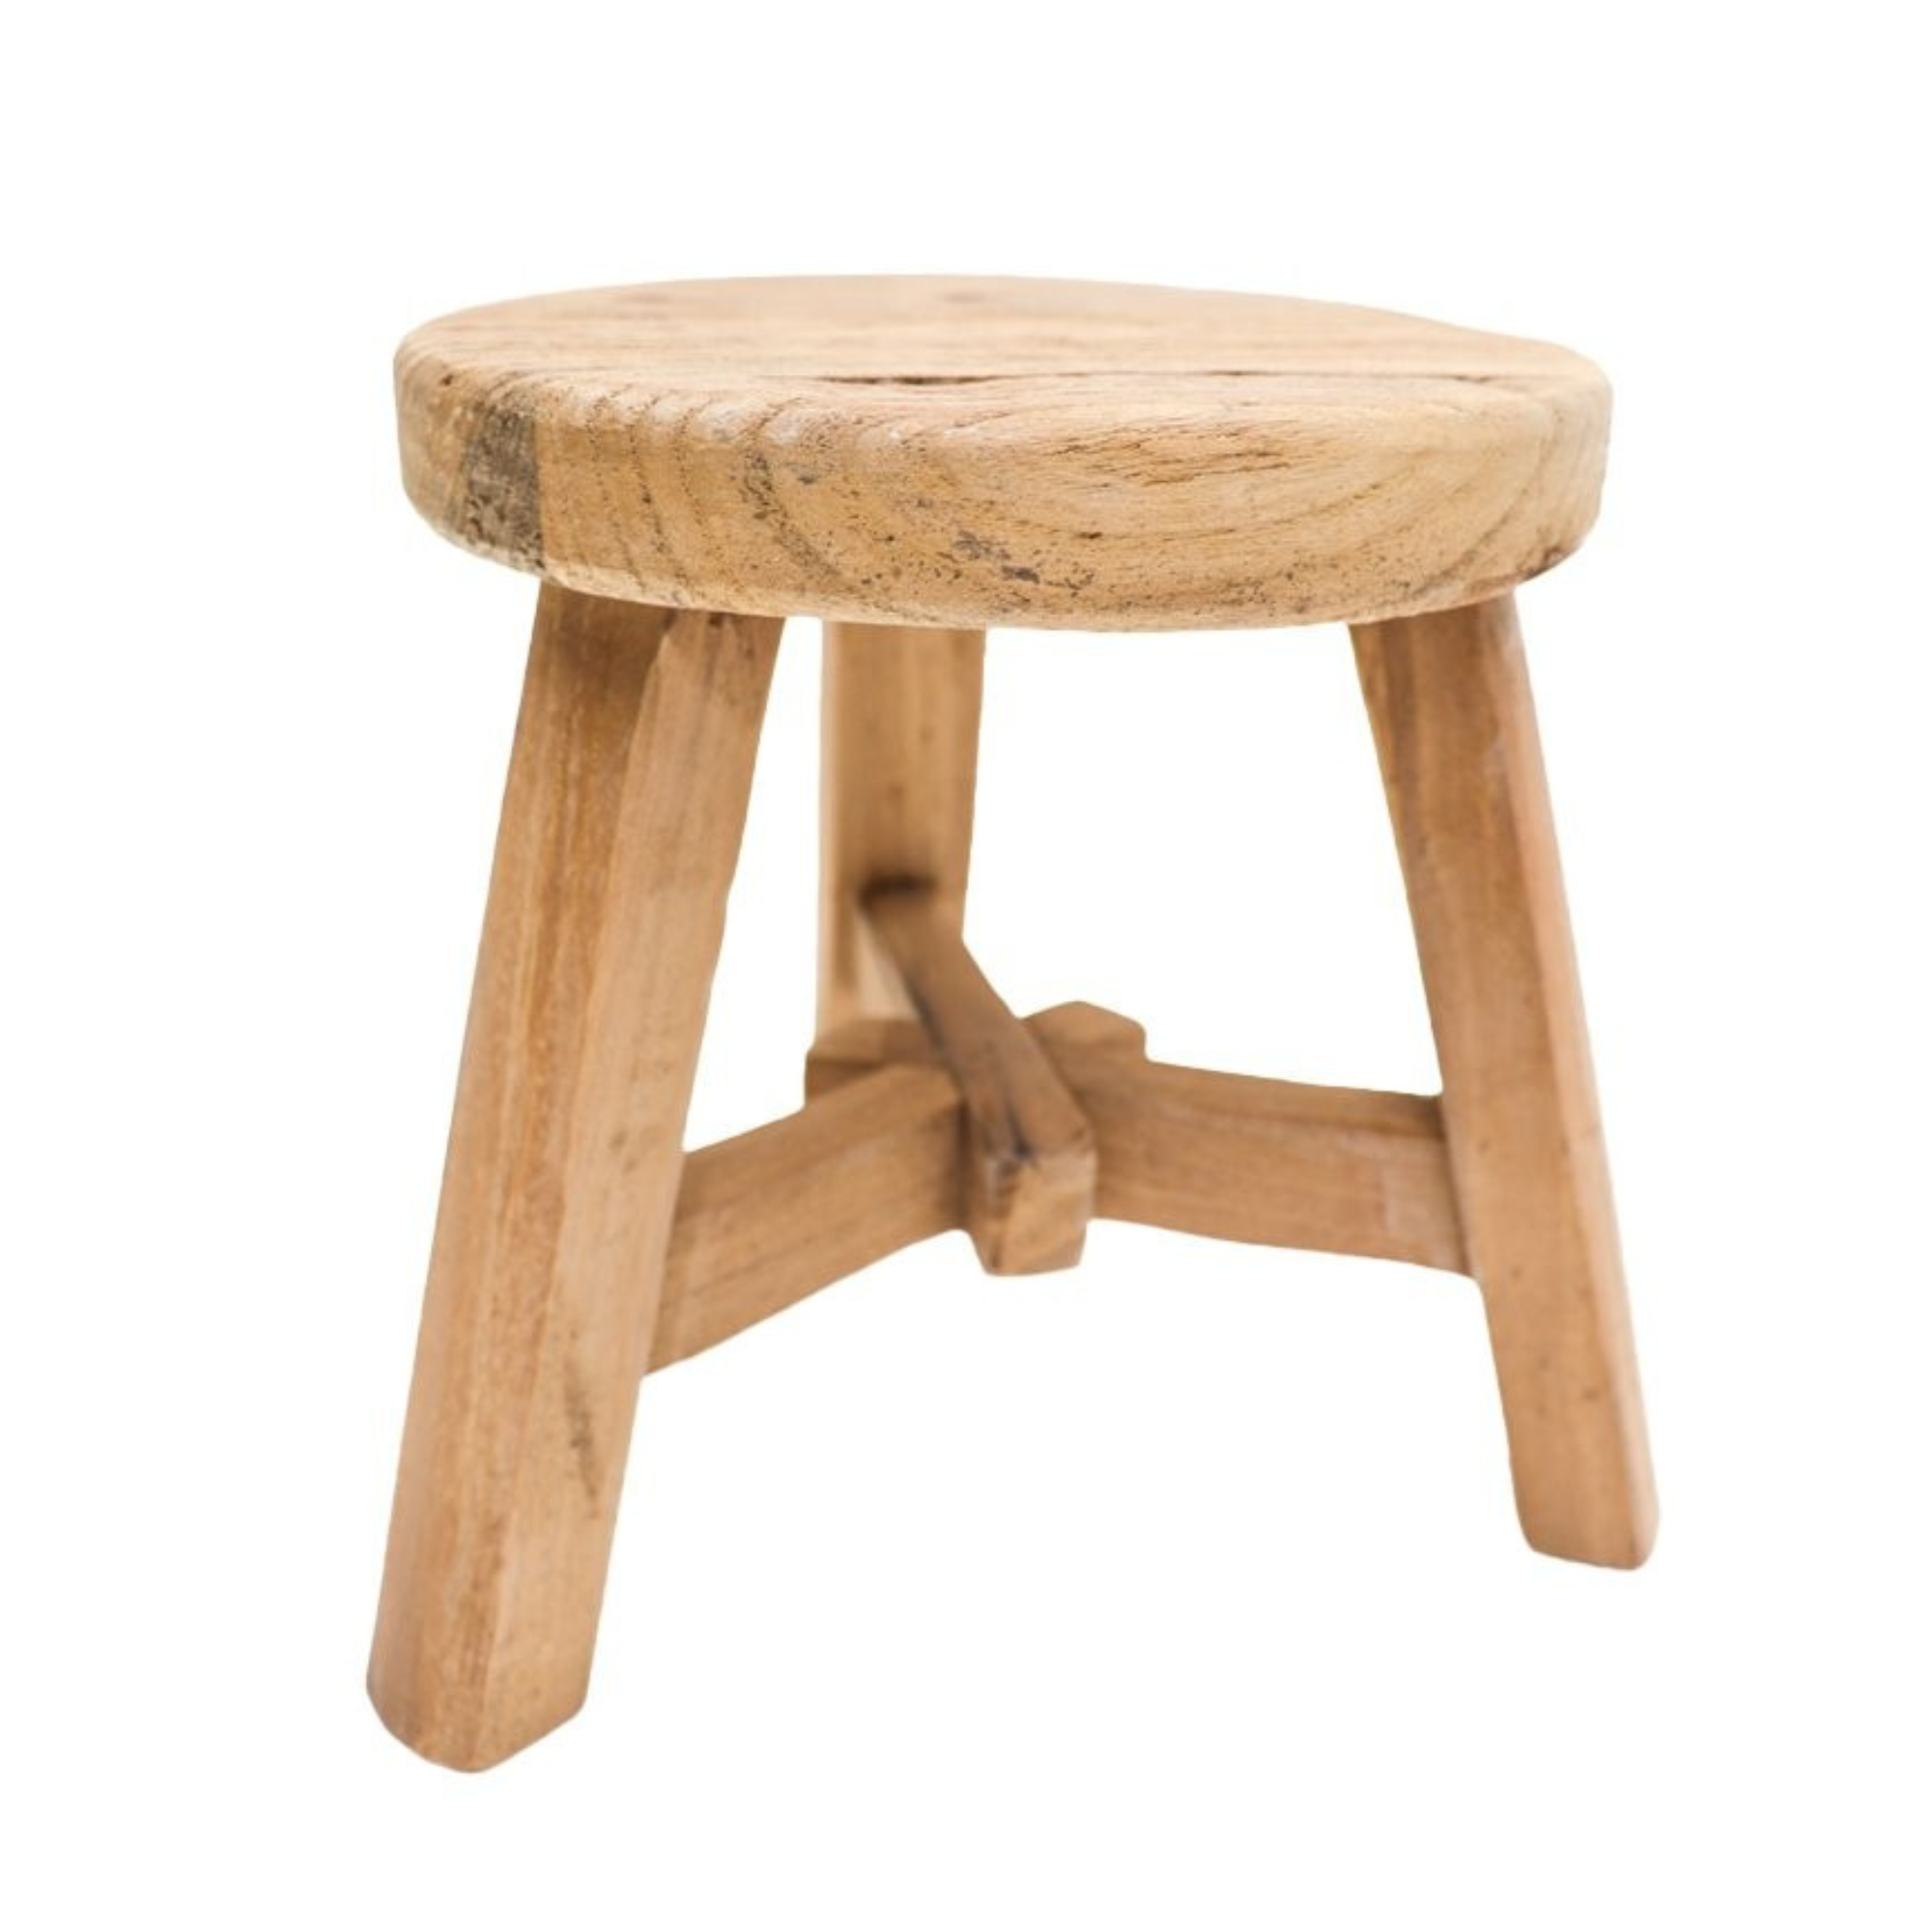 PARQ ROUND FOOTSTOOL | NATURAL OR BLACK